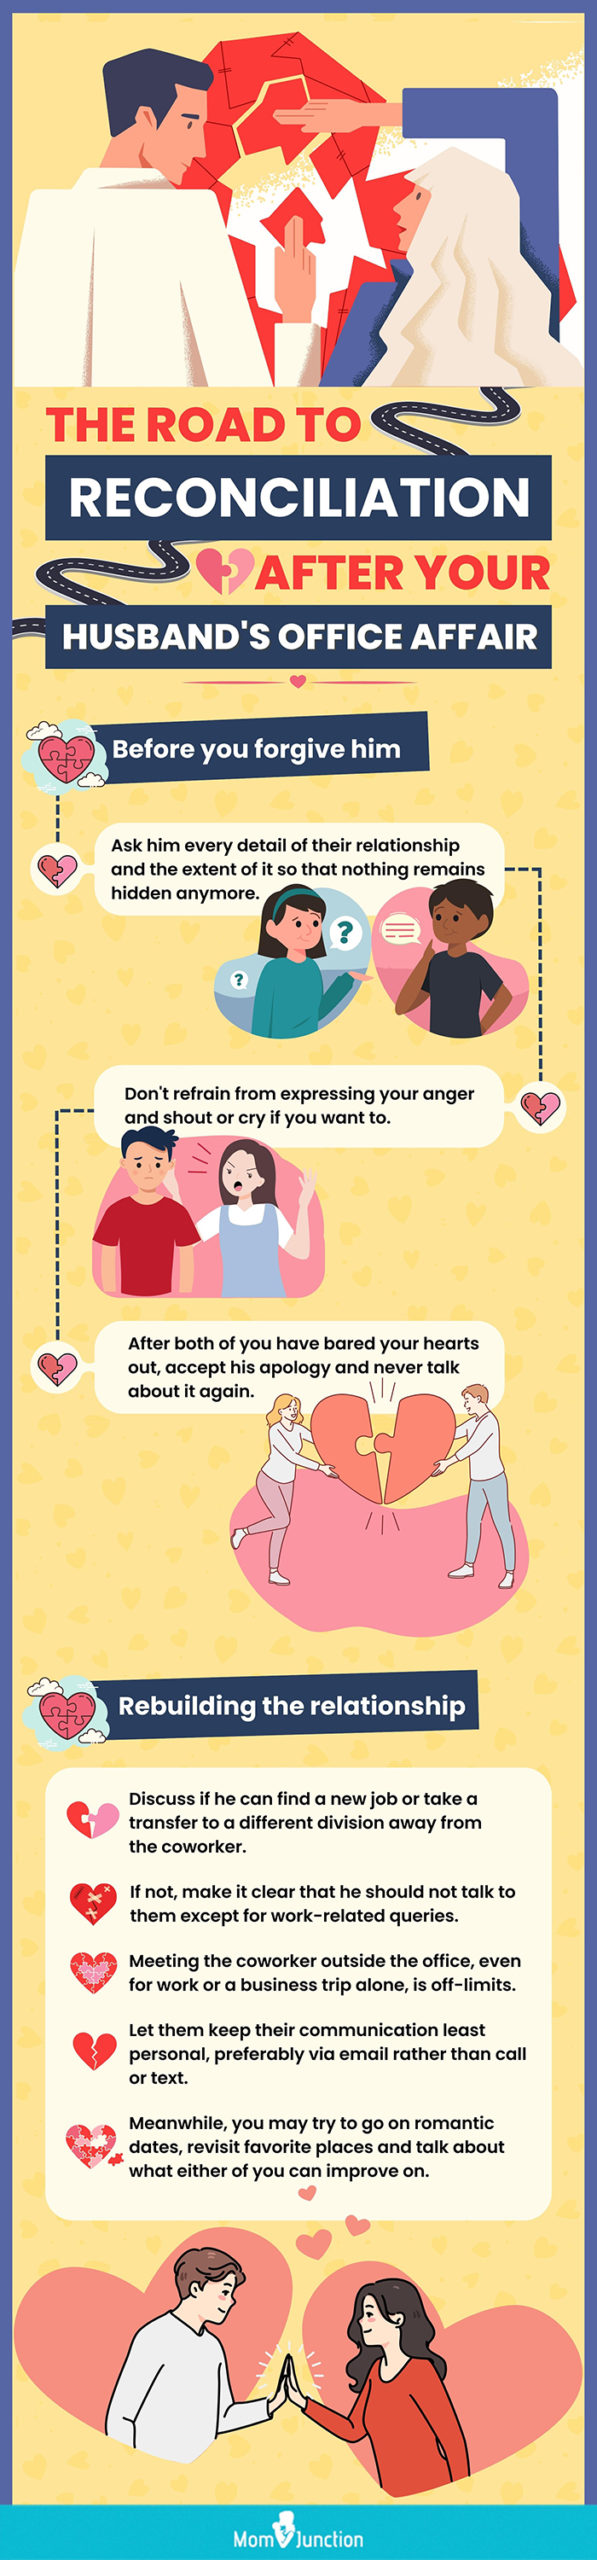 the road to reconciliation after your husband's office affair [infographic]